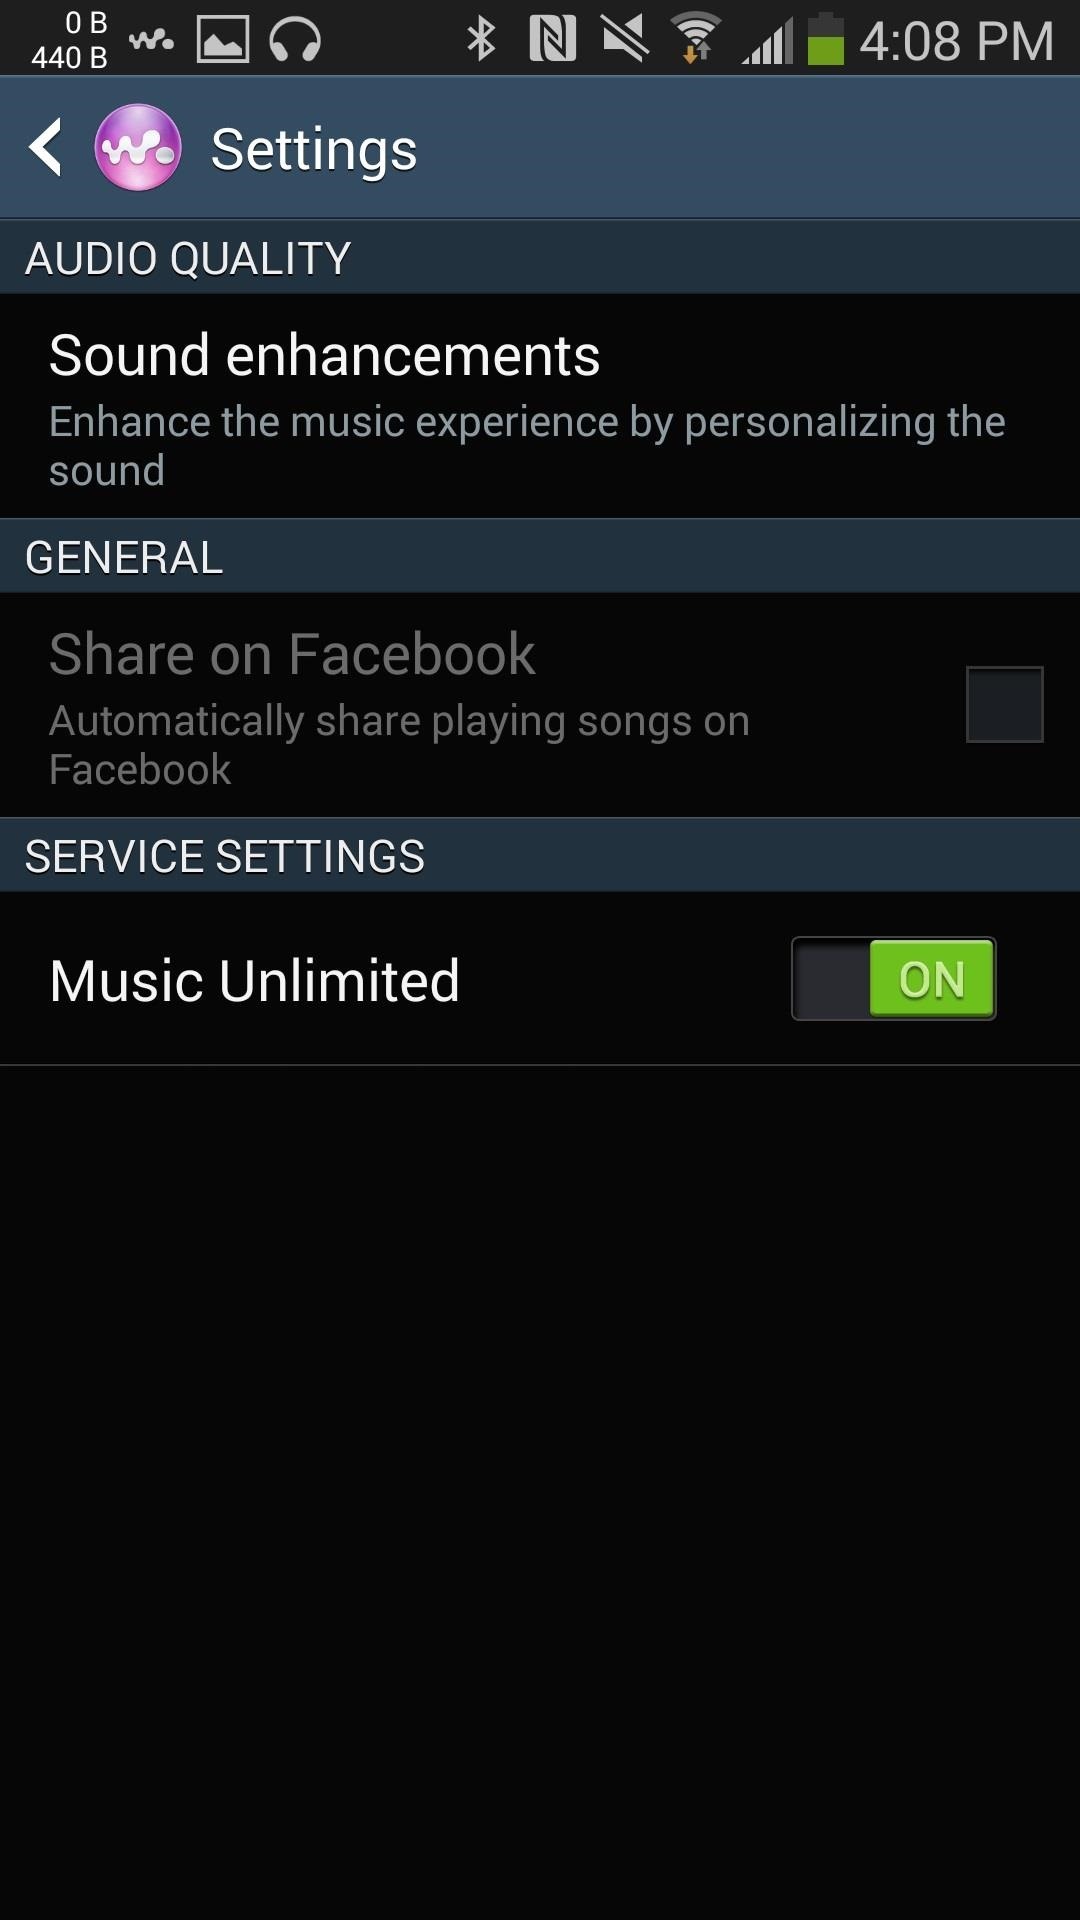 How to Get Sony's Exclusive Media Apps (Album, Movies, & Walkman) on Your Samsung Galaxy Note 3